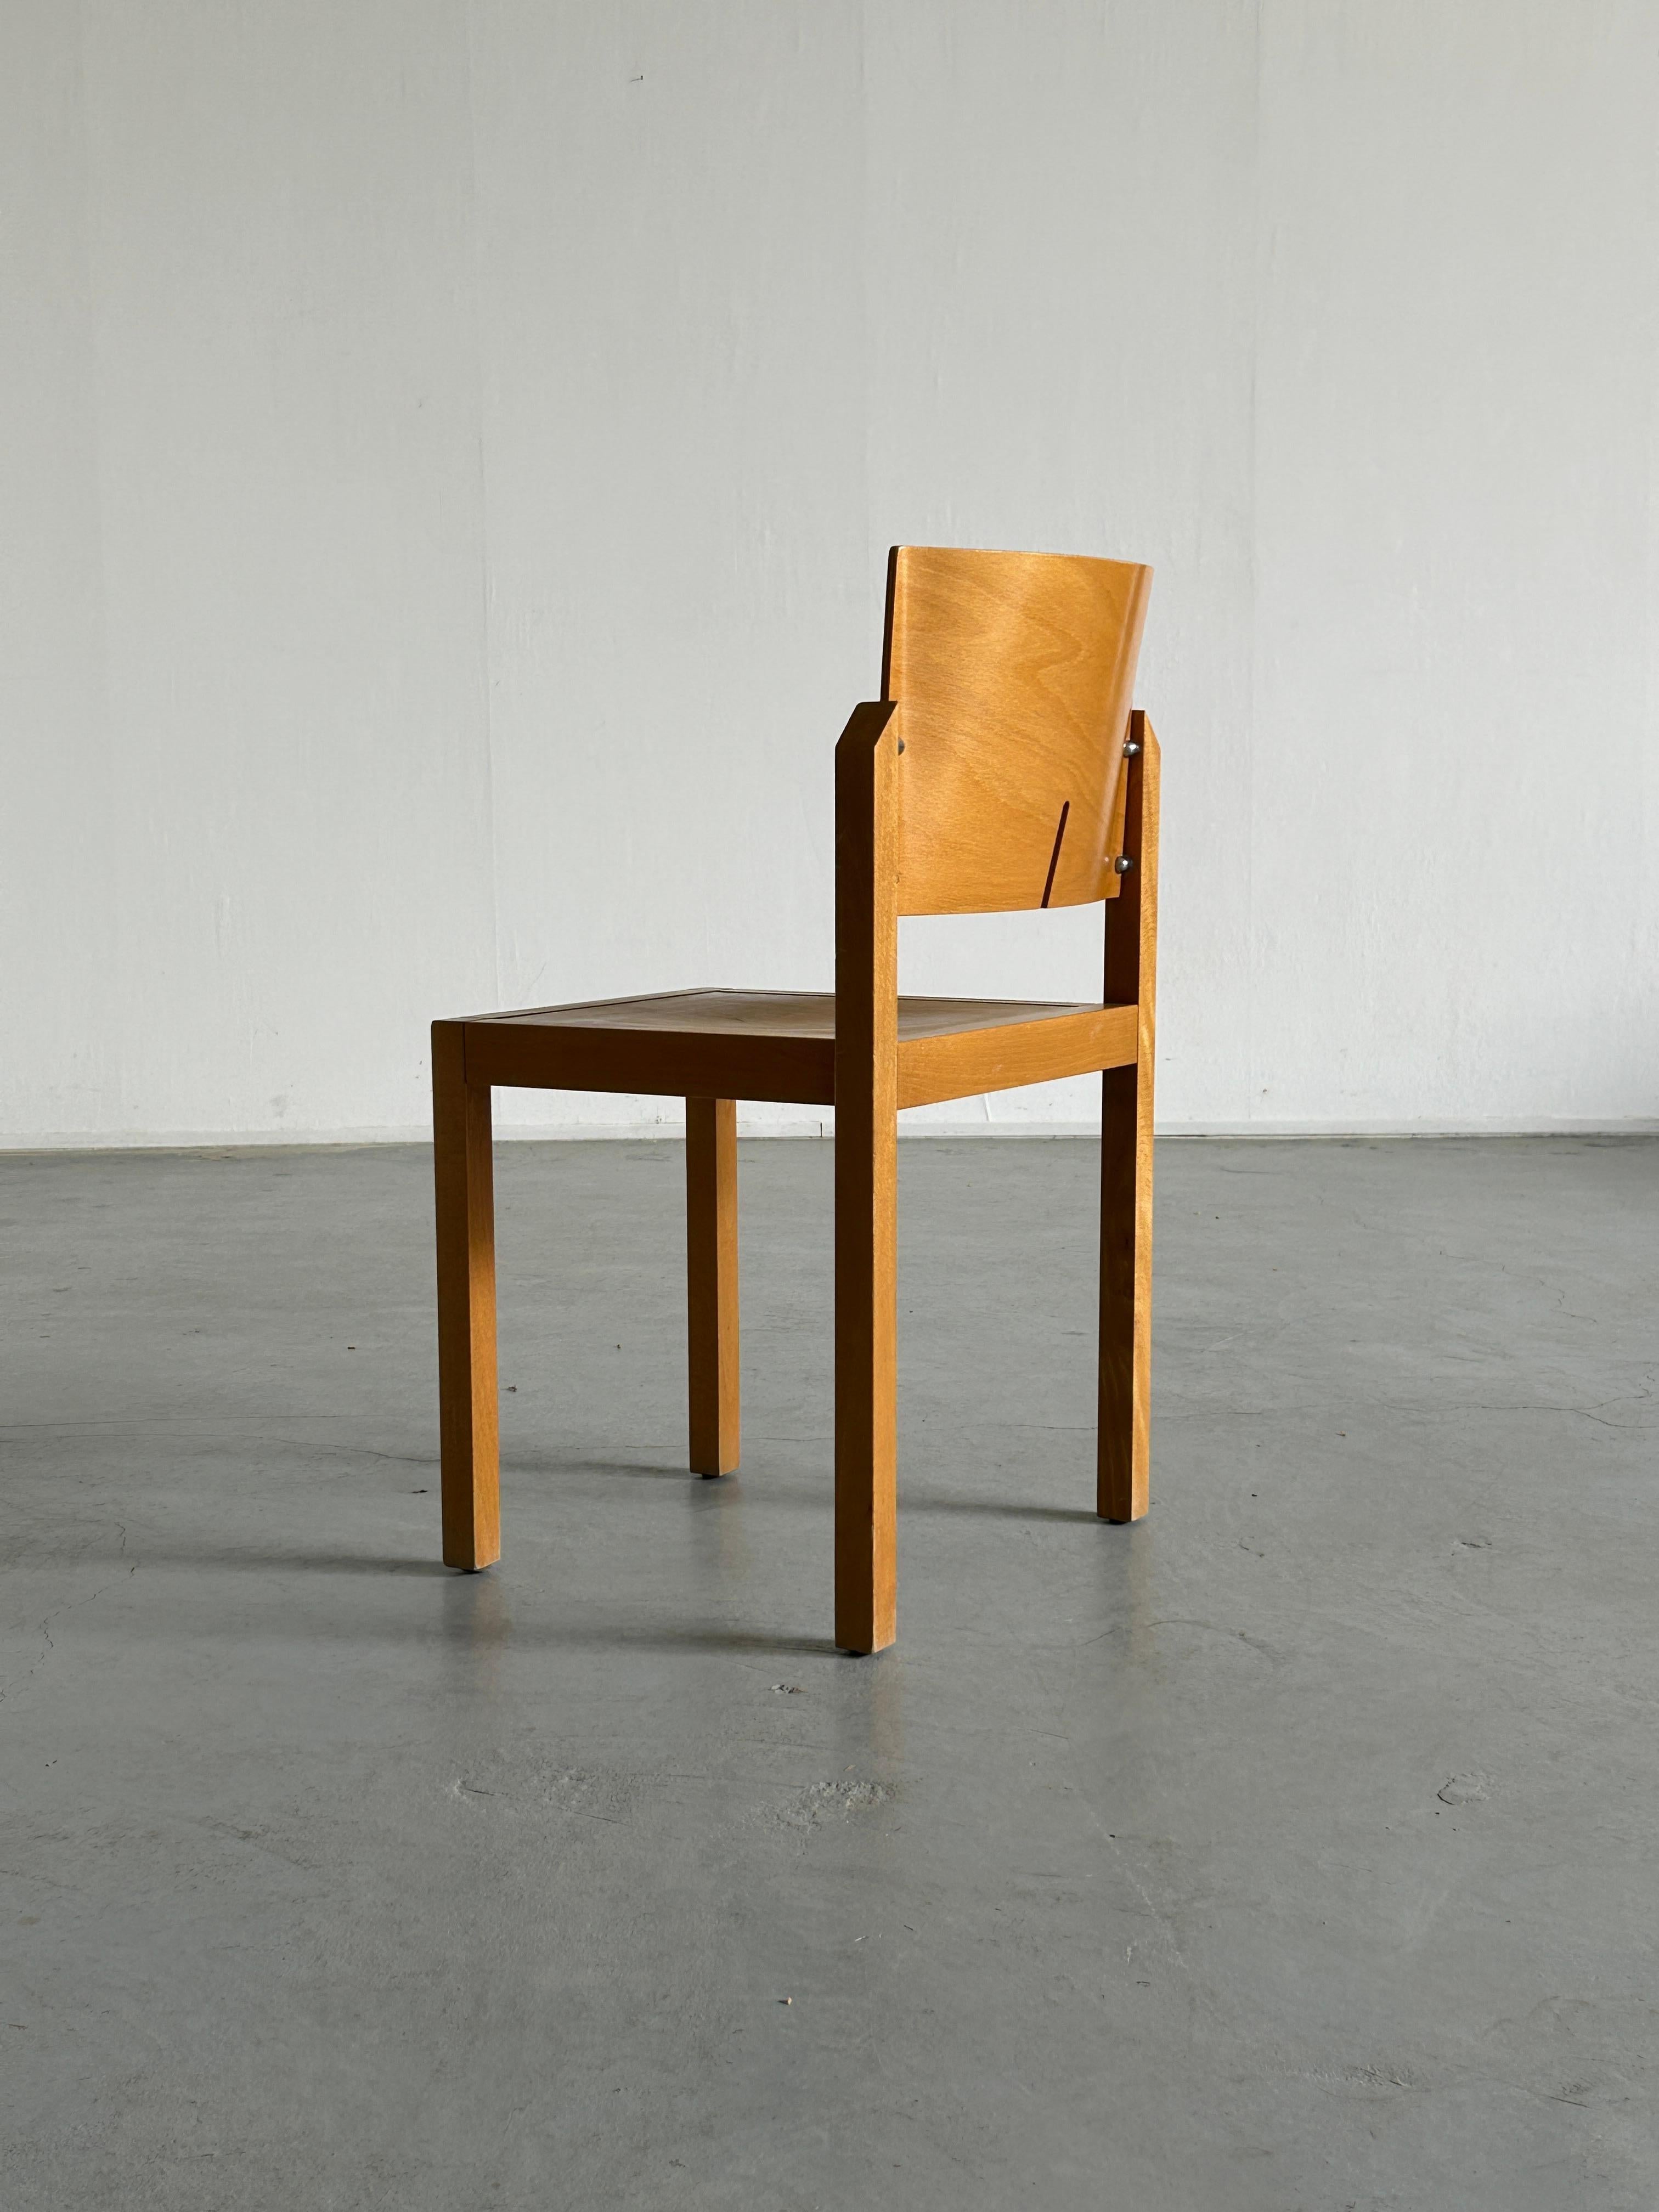 Late 20th Century Thonet Postmodern Sculptural Wooden Chair, 1990s Austria For Sale